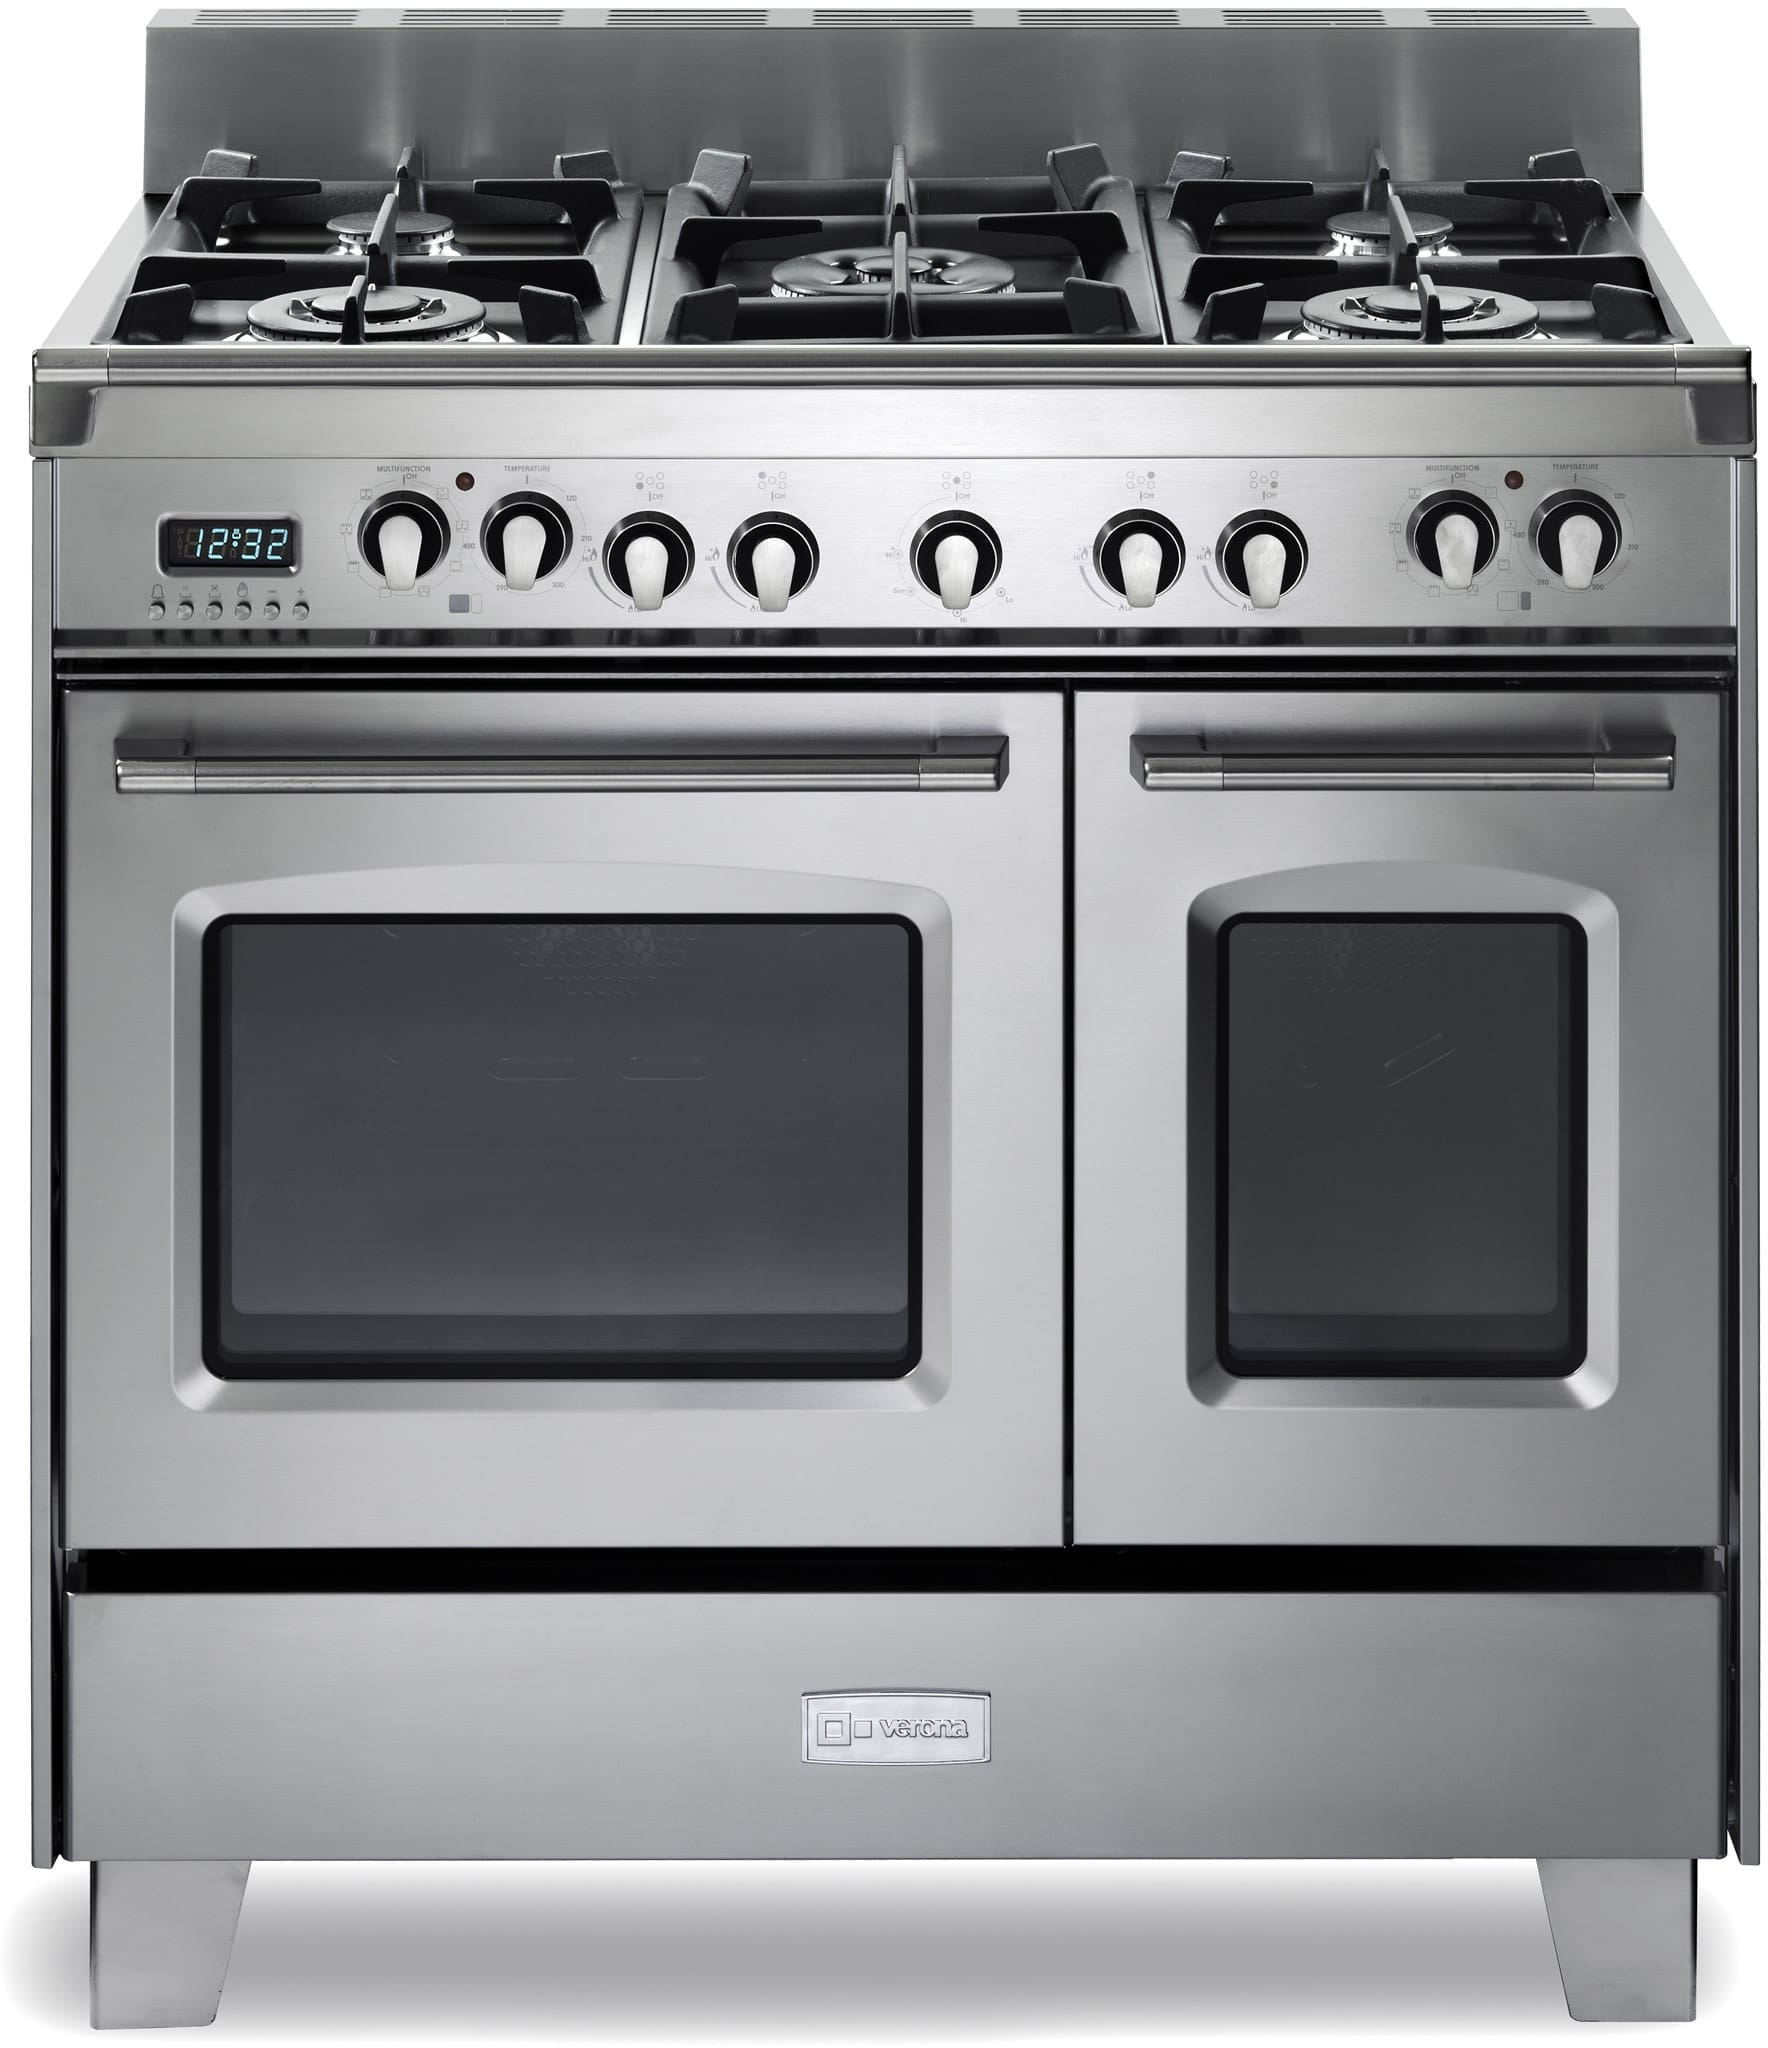 oven cleaning service,